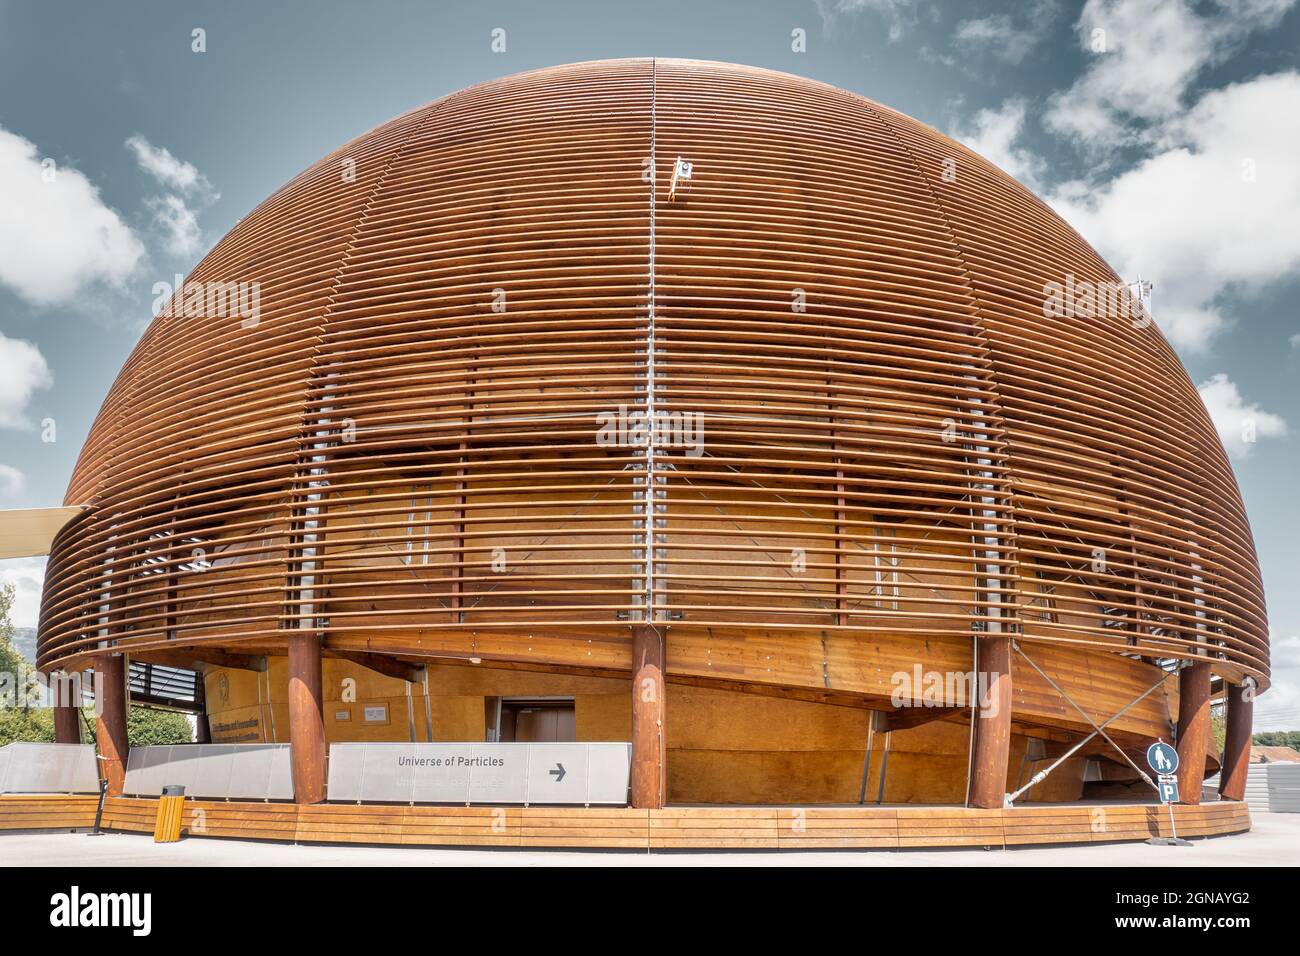 Globe of Science and Innovation at CERN, the European Organization for Nuclear Research. Visitor center, museum and exhibitions. Stock Photo